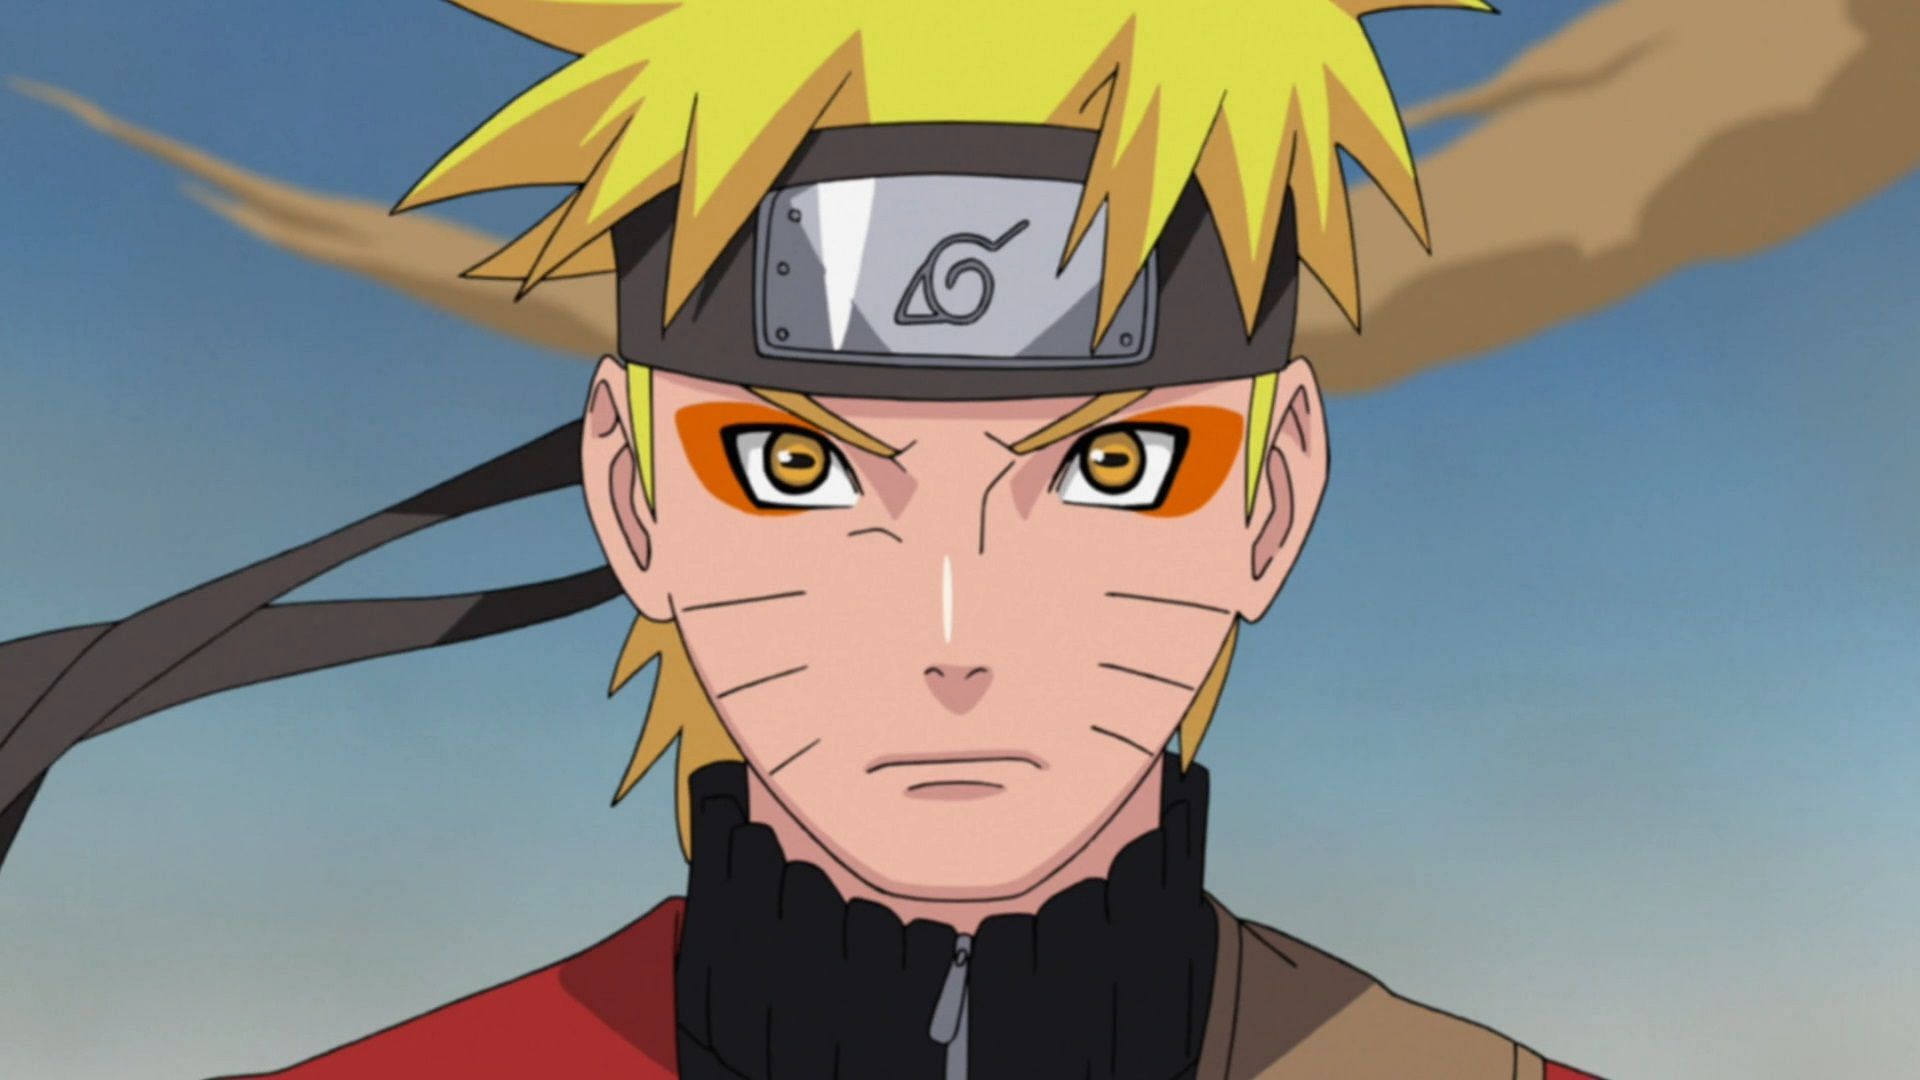 times Naruto was incredibly righteous (and 4 times he was a jerk)